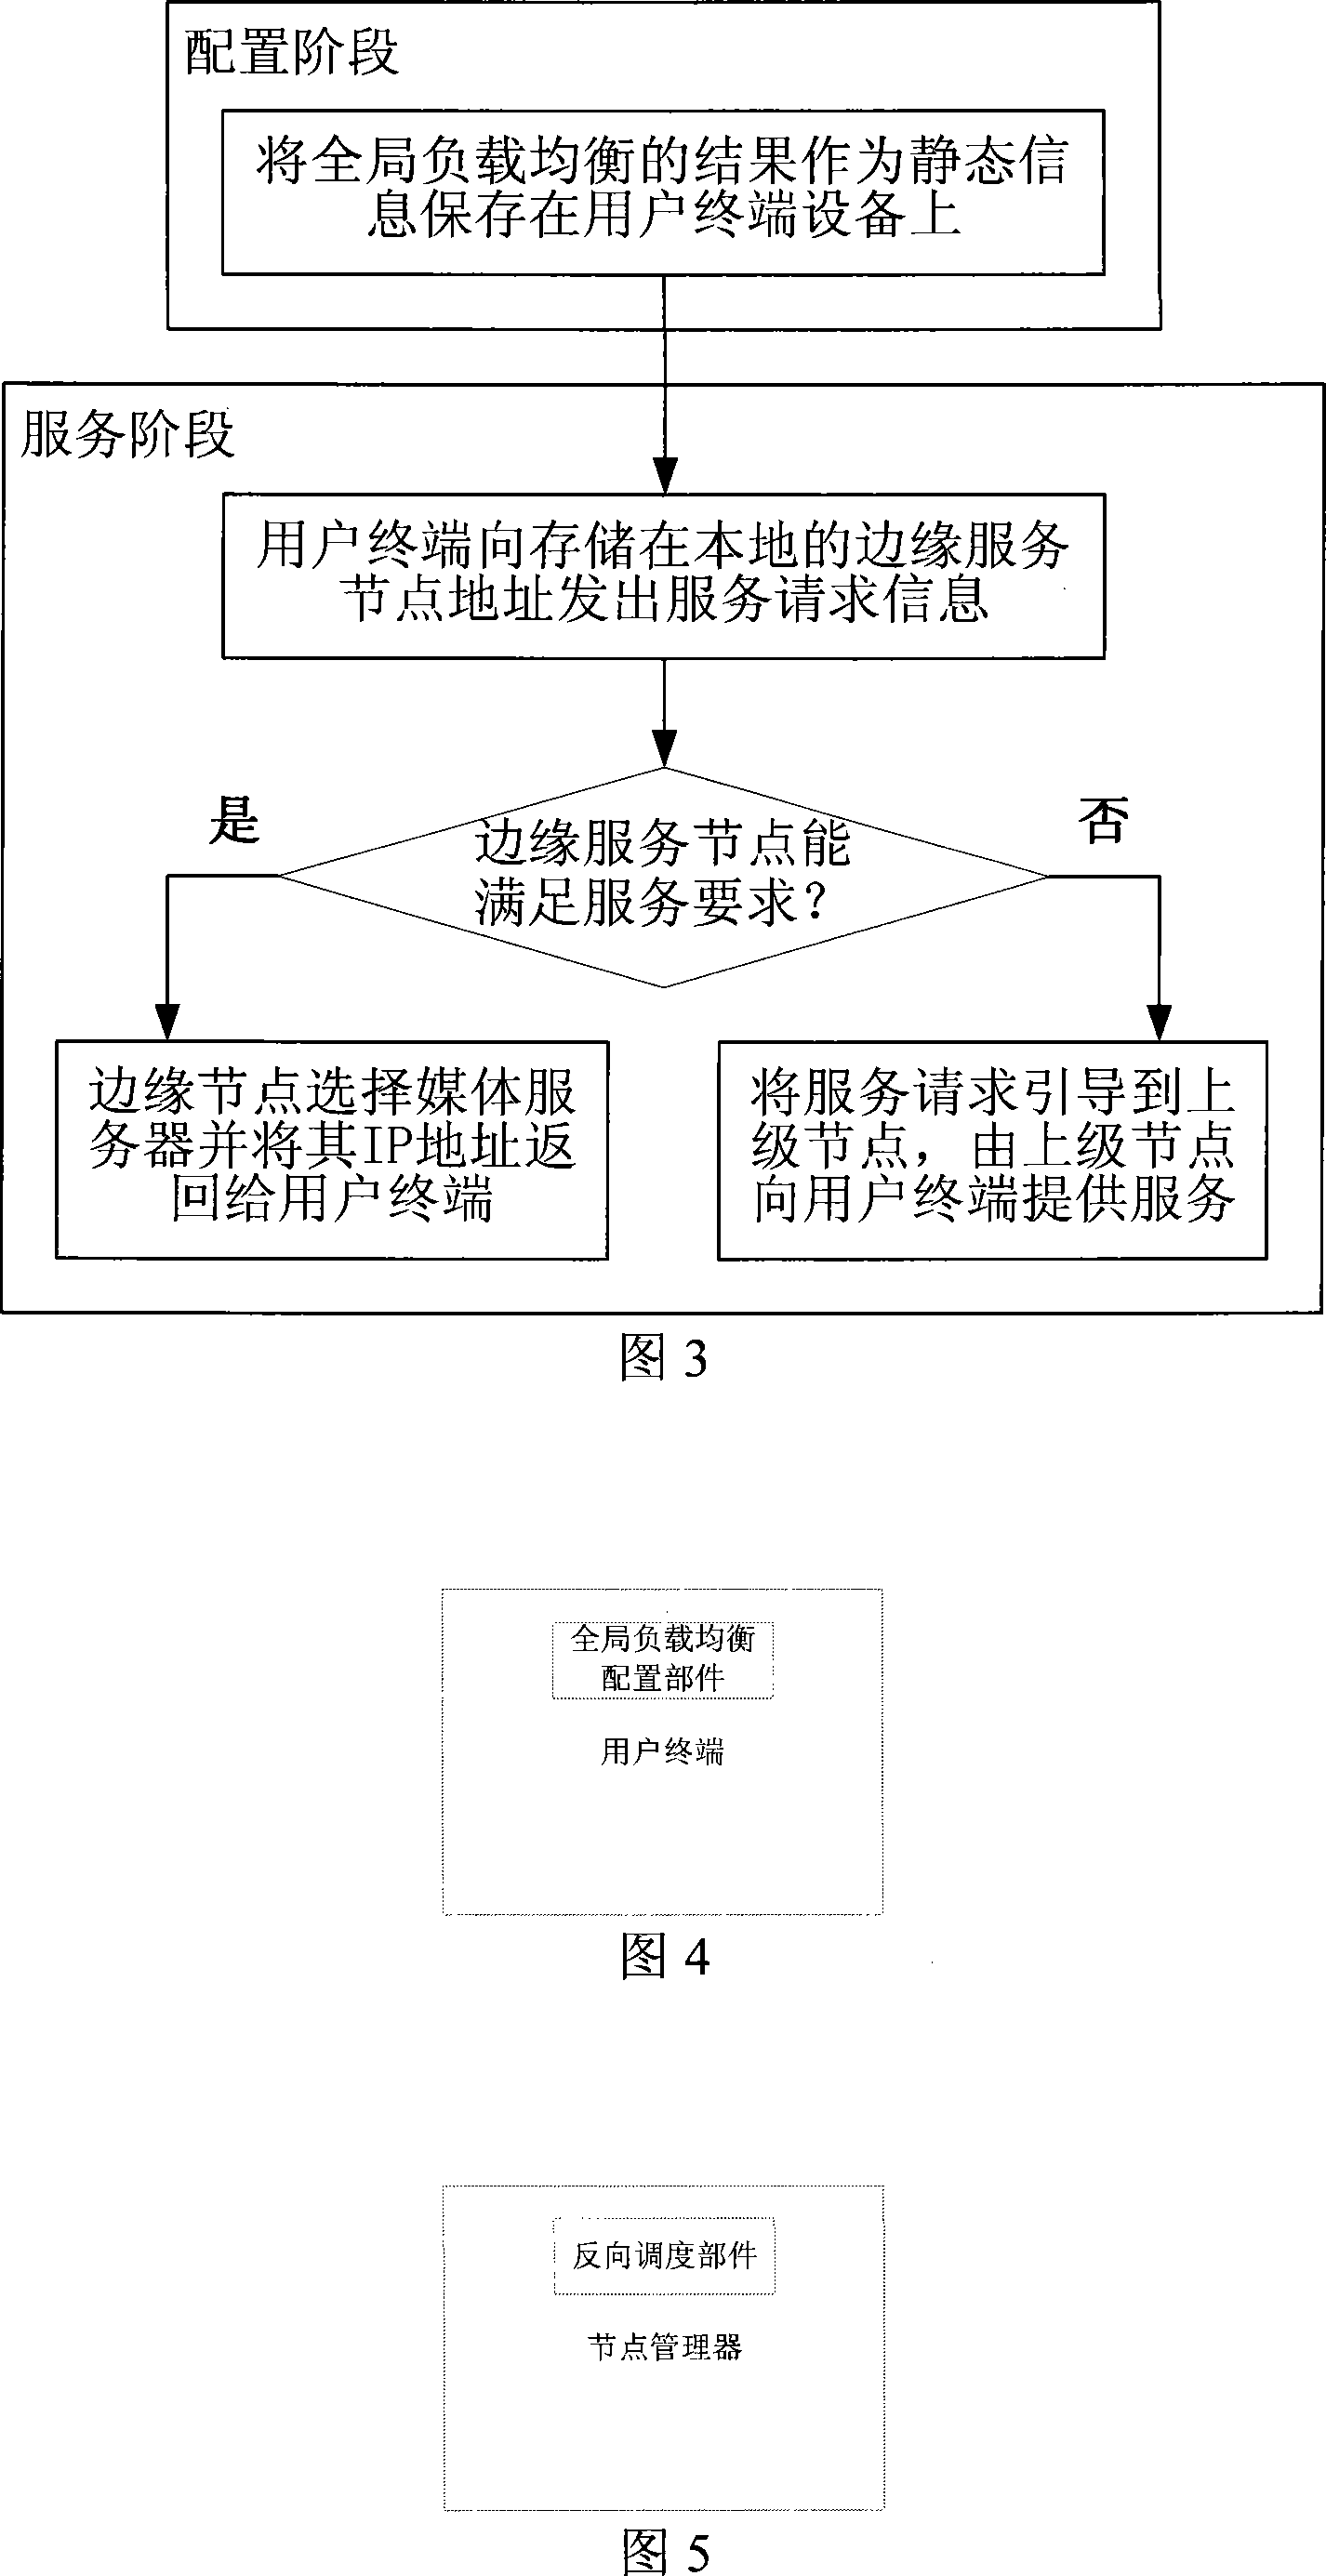 Service scheduling method for interactive television system